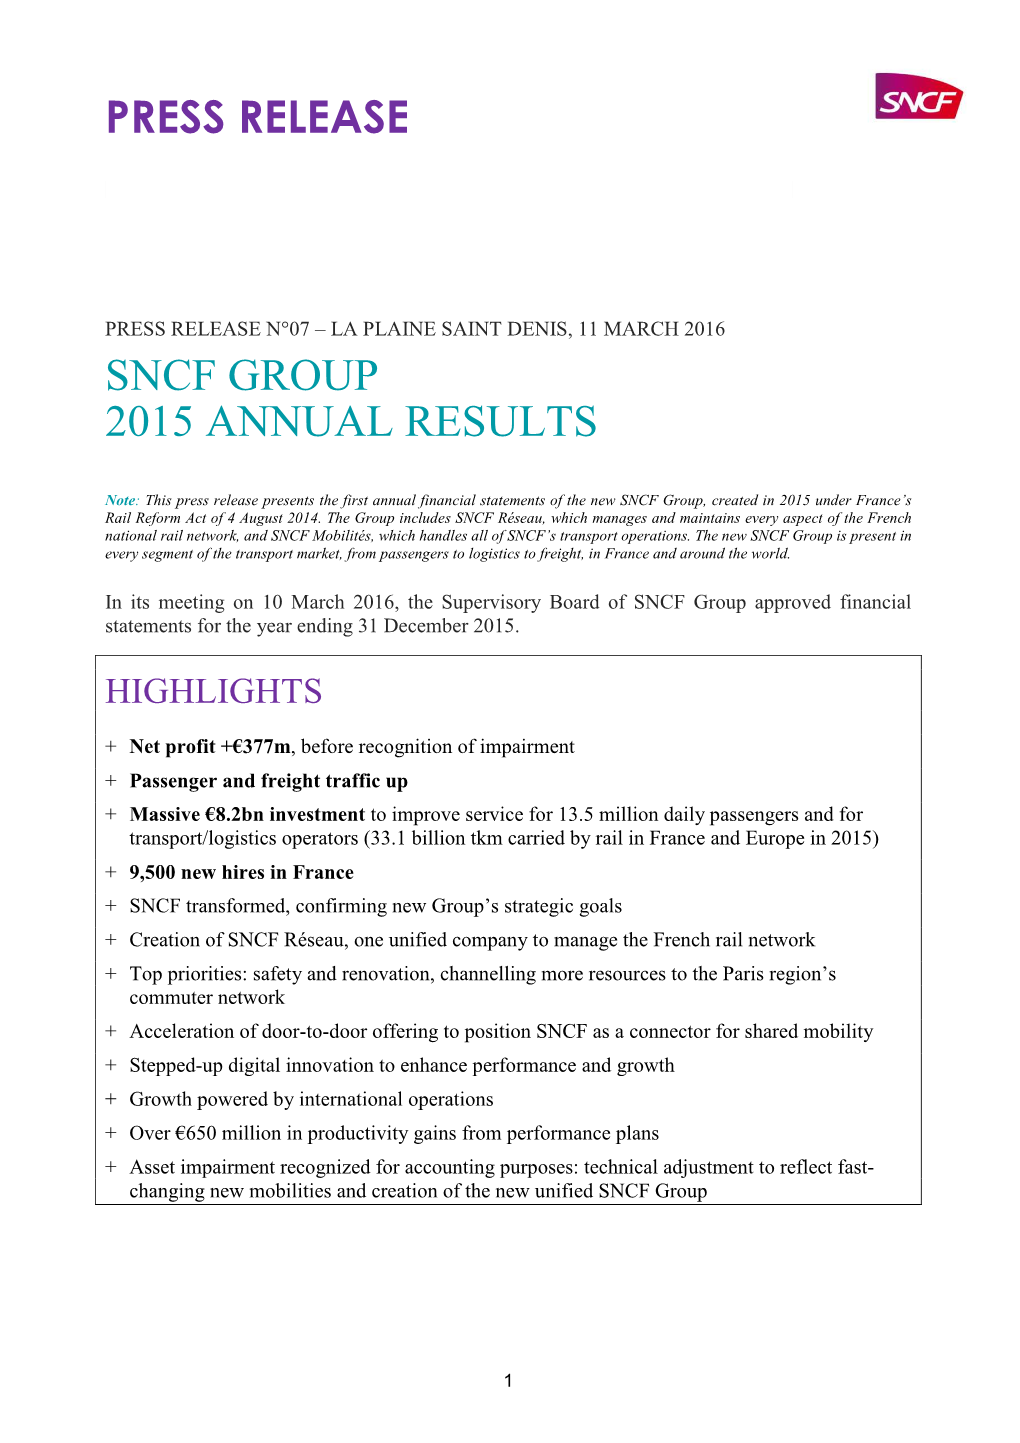 SNCF Group PR FY2015 Annual Results 03.11.2016